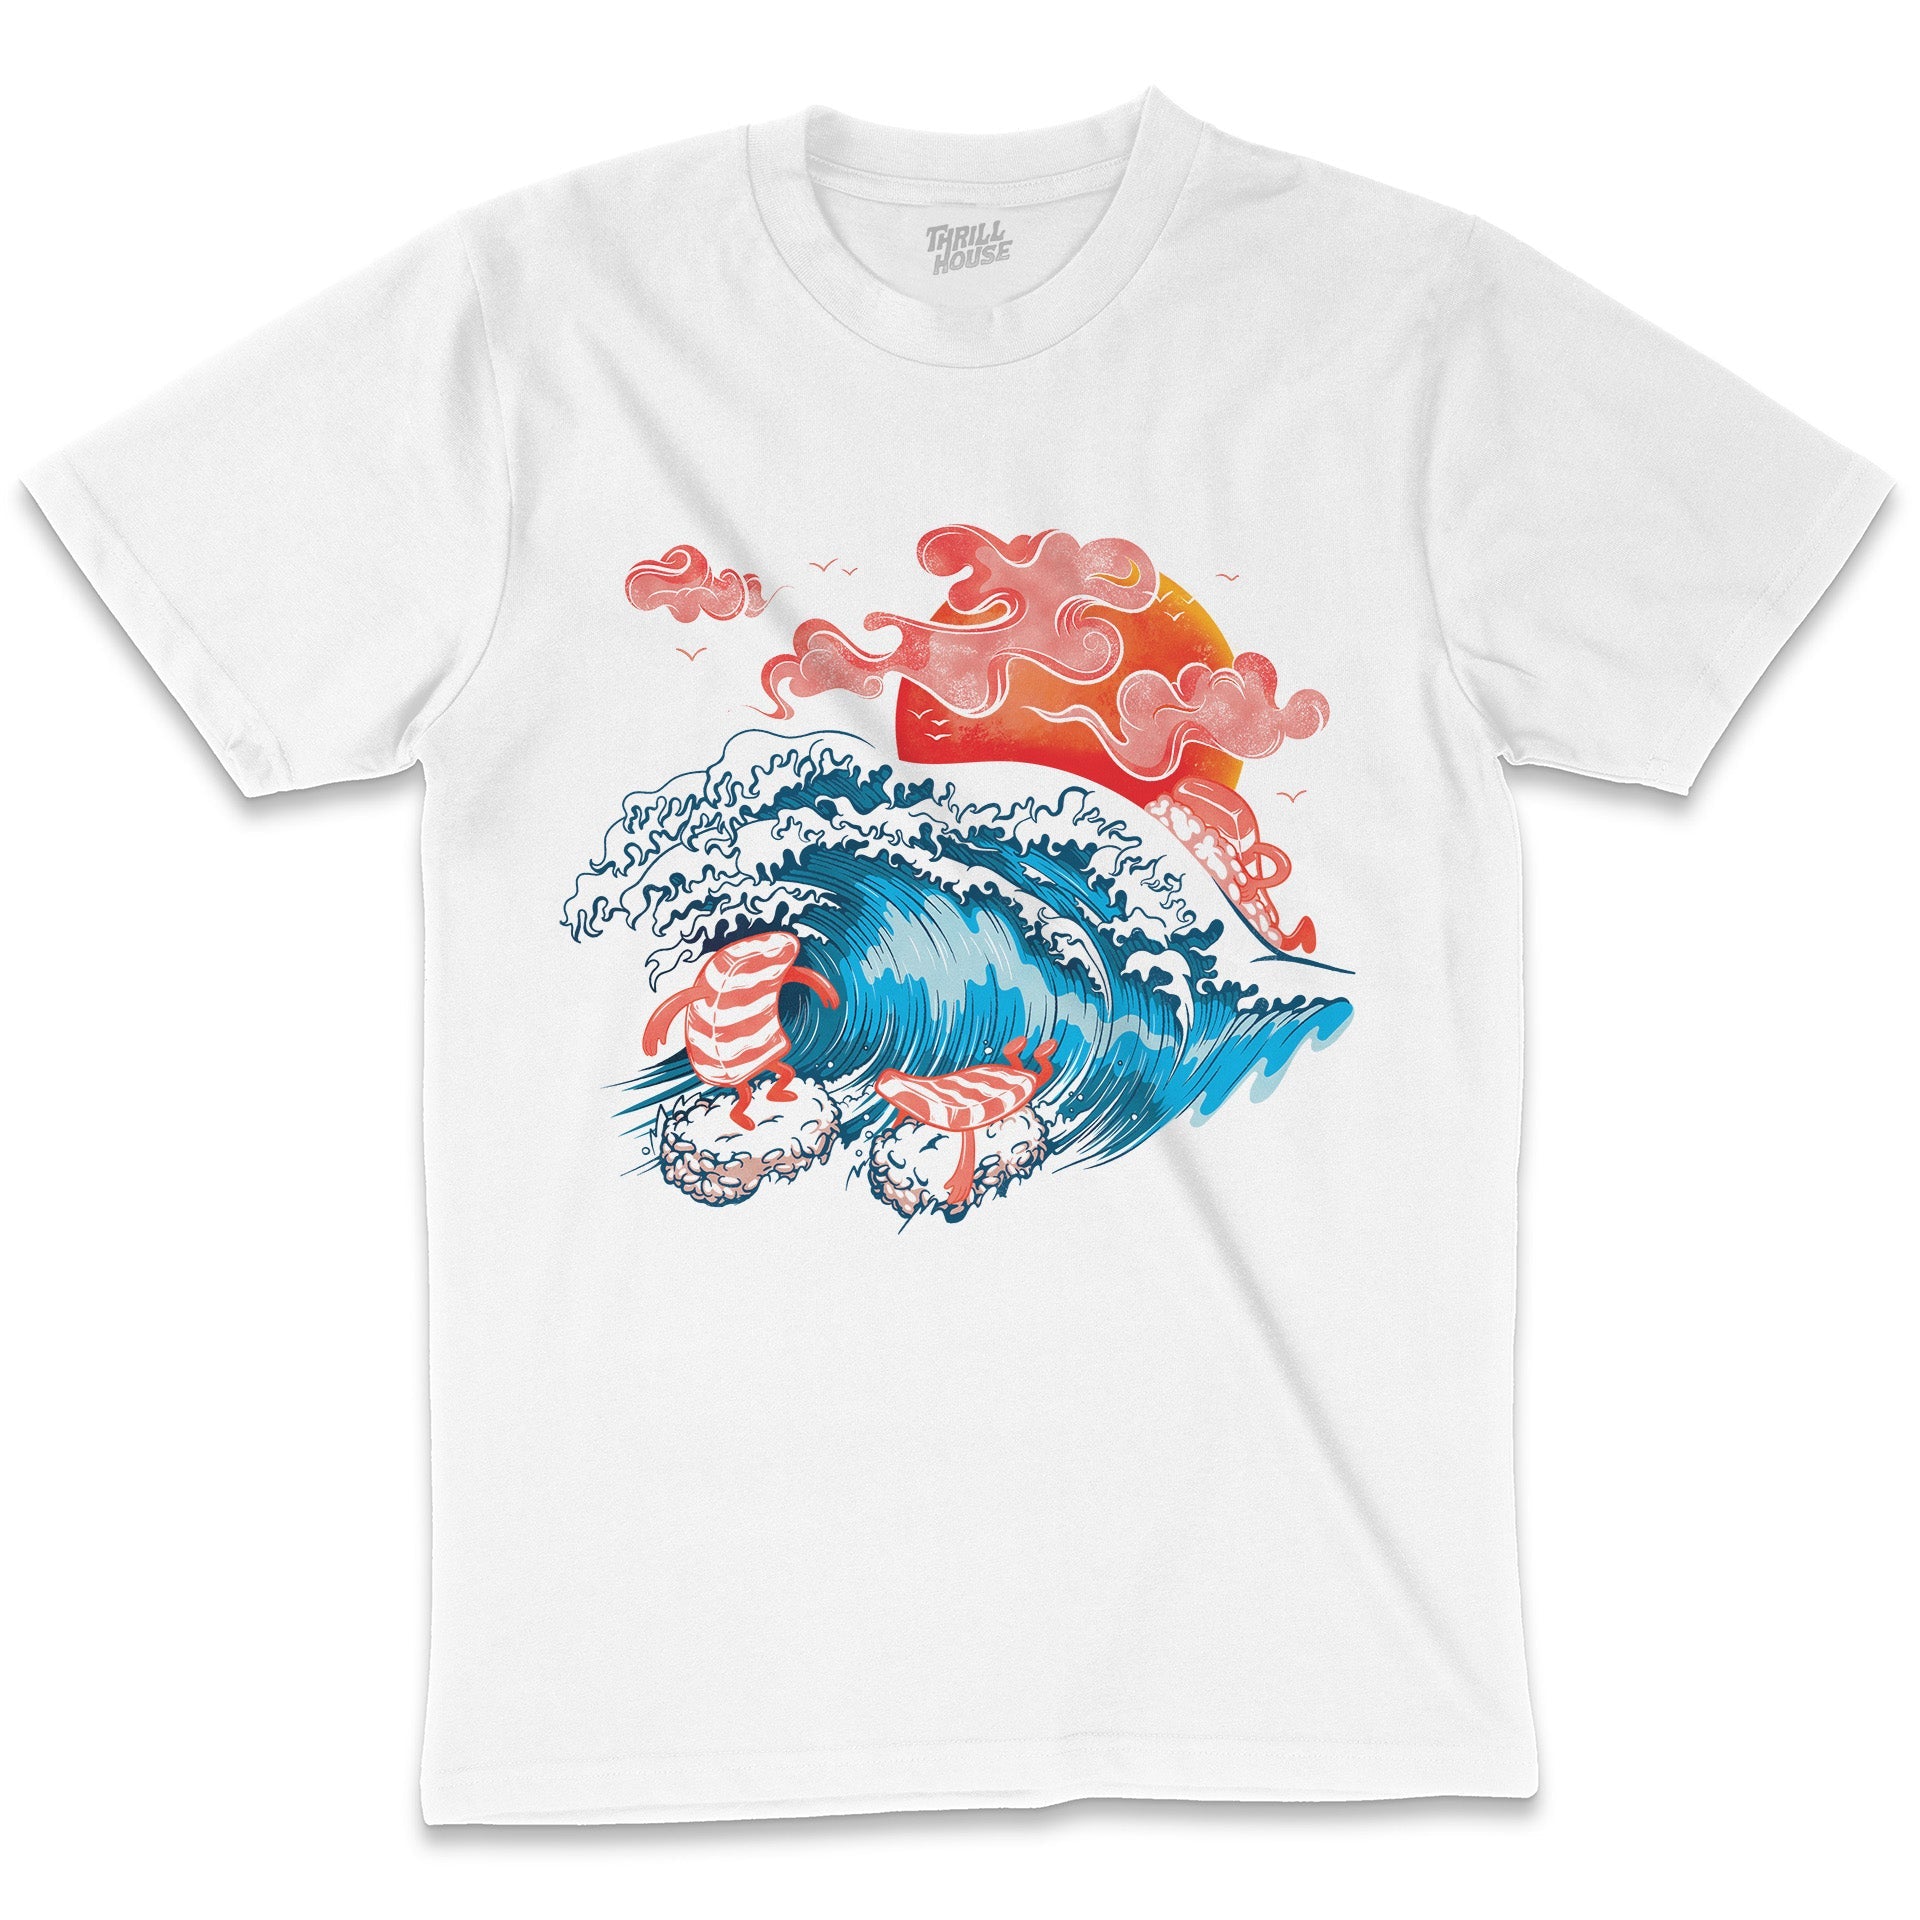 Sushi Surf Japanese Japan Salmon Nori Food Foodie Cute Artsy Surfing Great Wave Cotton T-Shirt